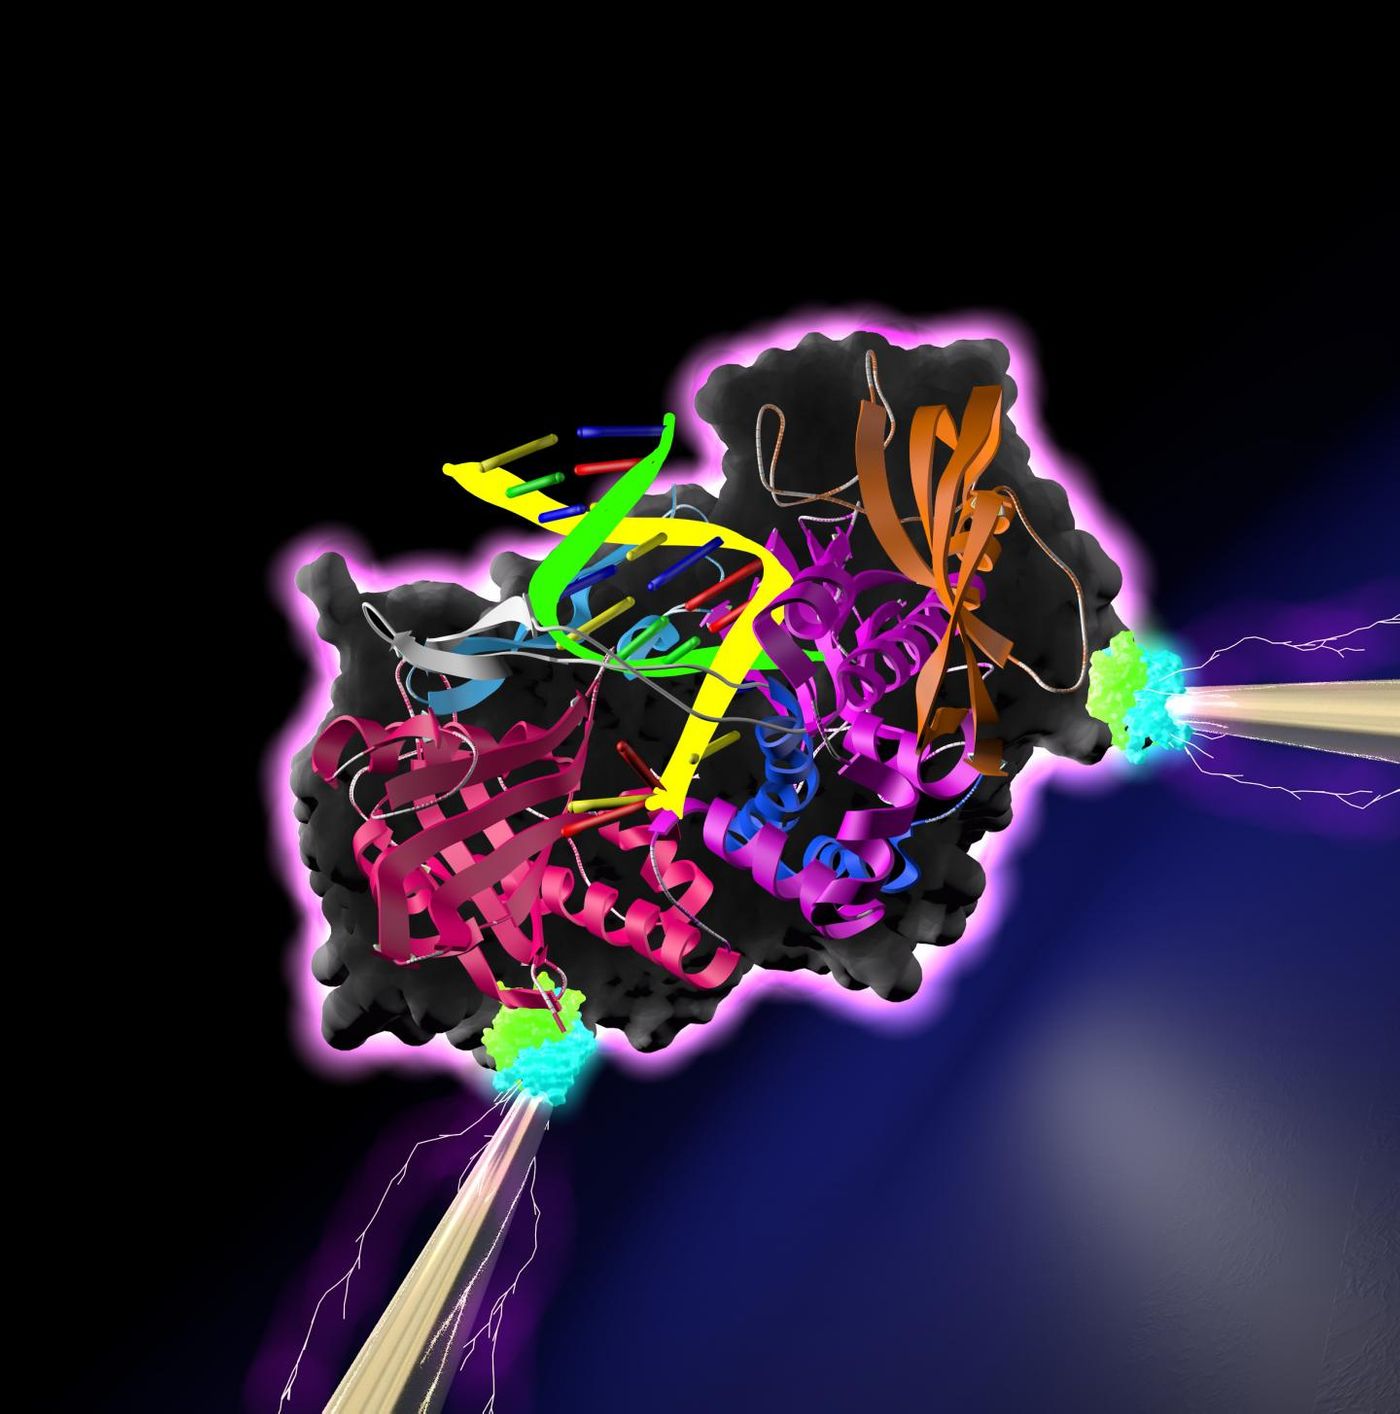 A DNA polymerase - an enzyme that synthesizes DNA molecules from nucleotide building blocks--is poised between a pair of electrodes. / Credit: Lindsay lab